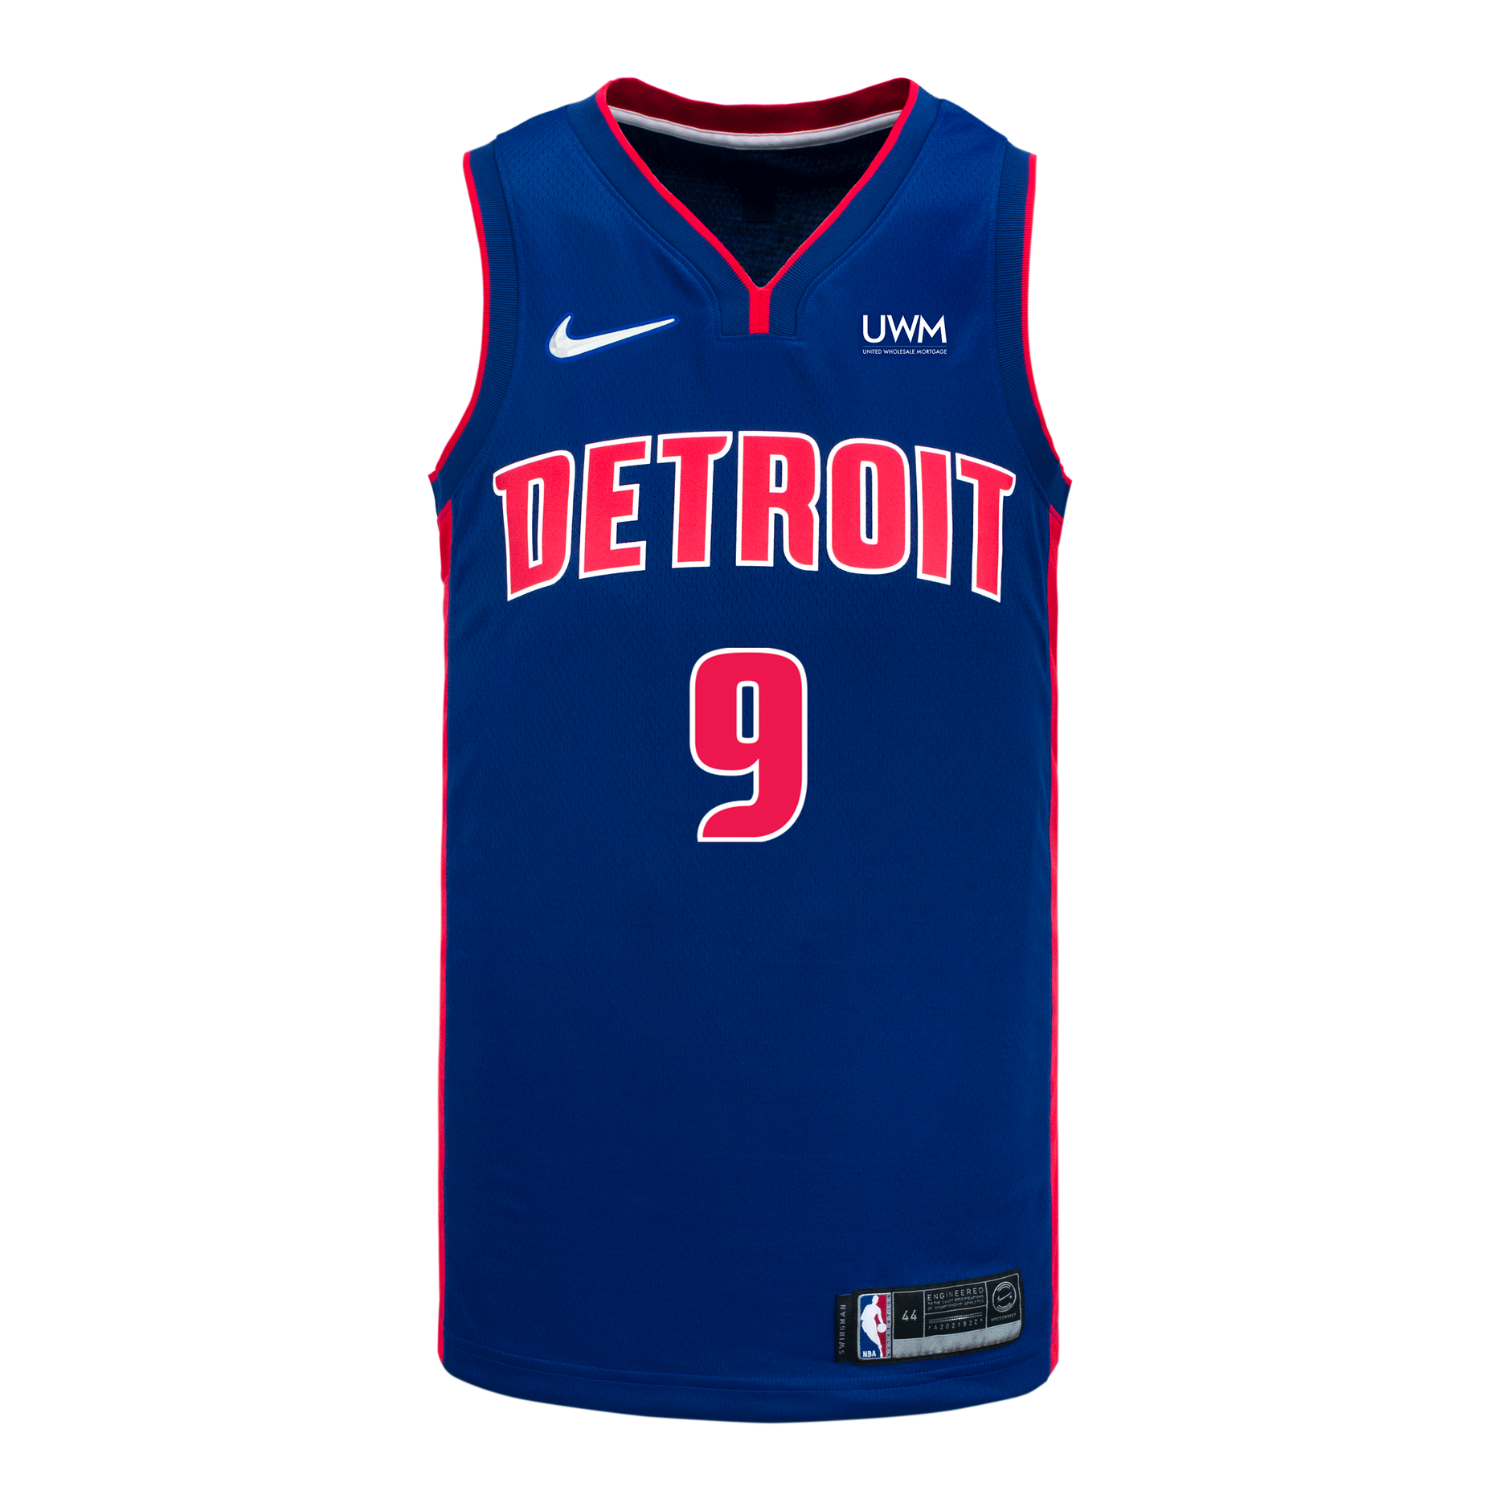 Shop Nba Allstar 2023 Jersey Short with great discounts and prices